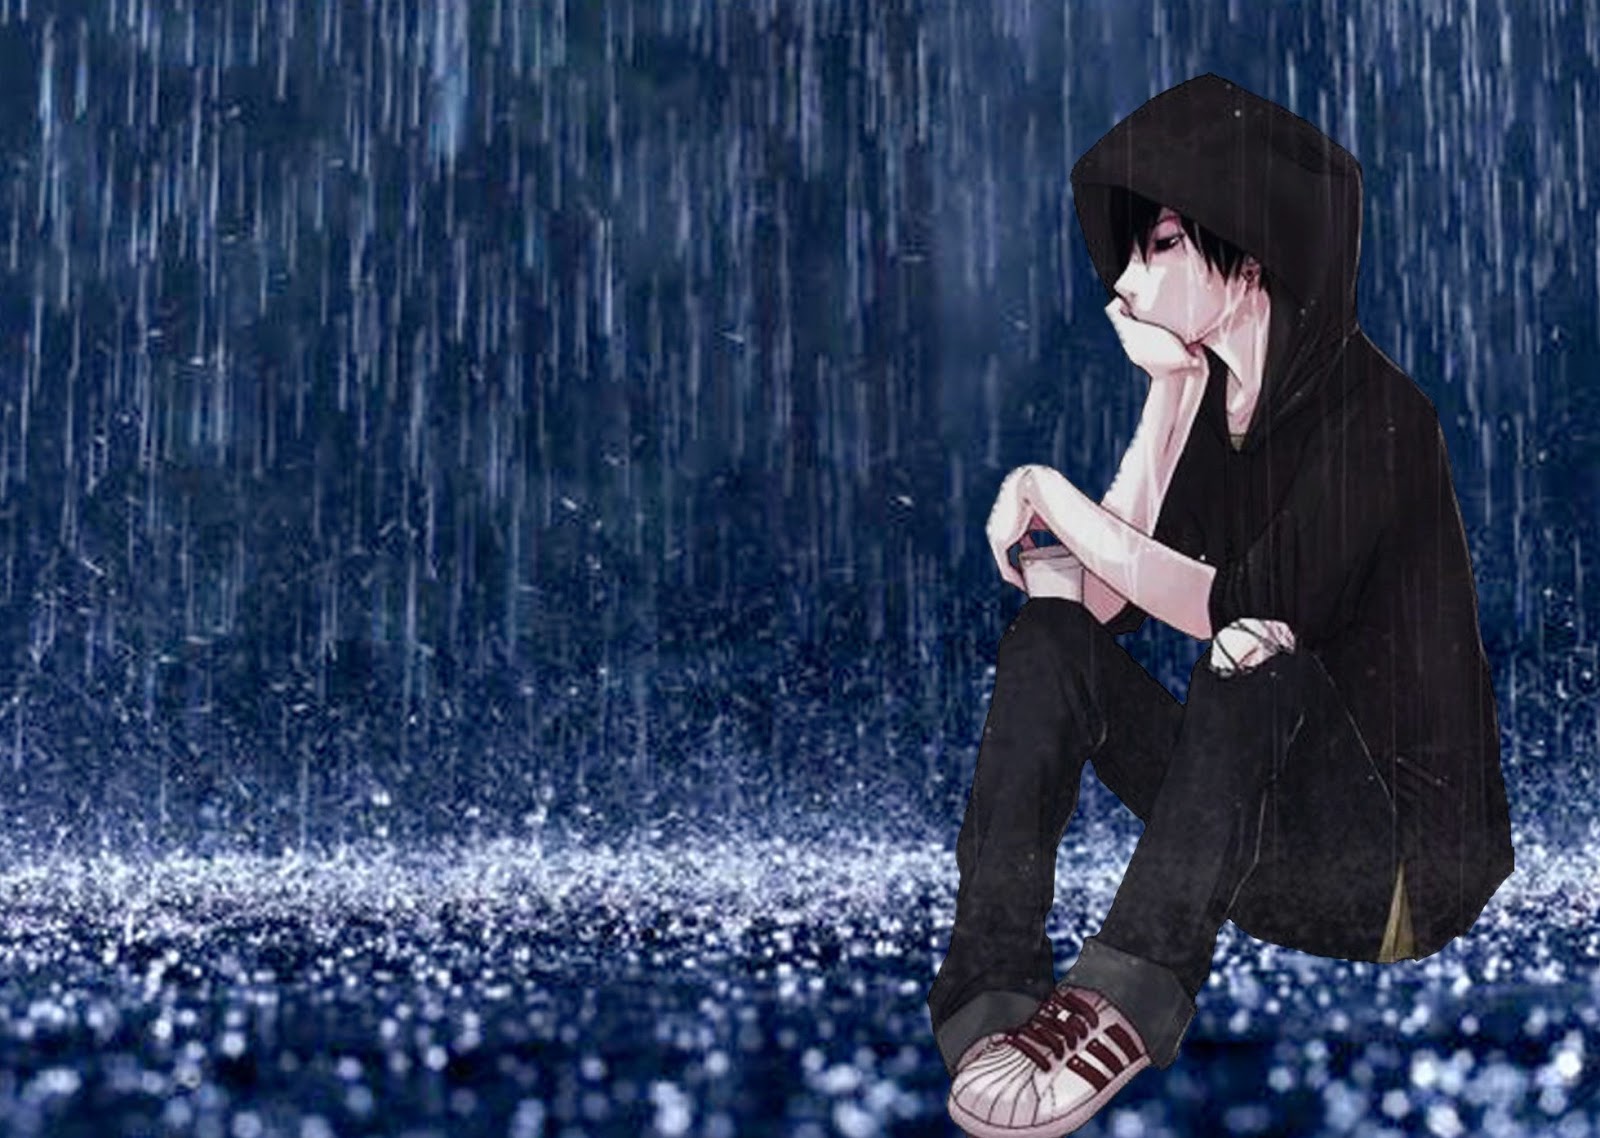 Alone Boy HD Wallpaper and Images Boy in rain 1600x1138